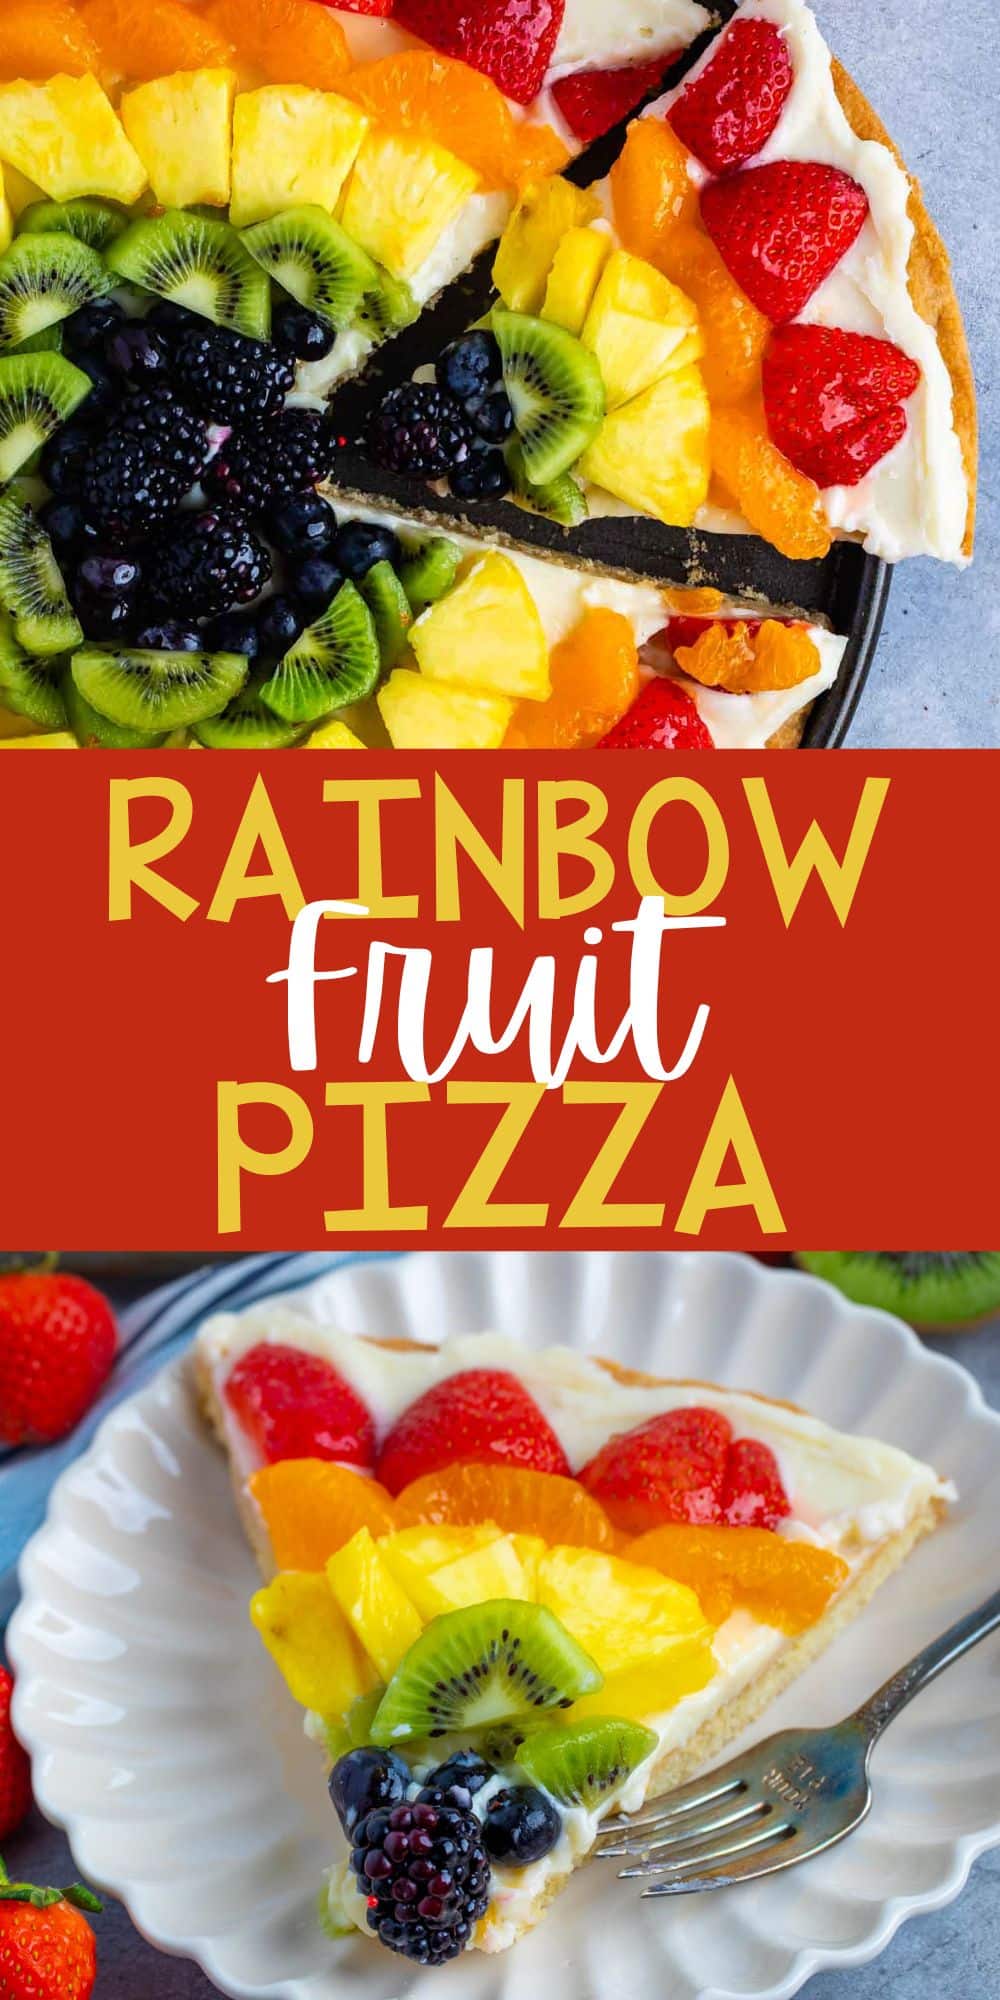 two photos of all types of fruit laid in rainbow order on a circular piece of dough with words on the image.